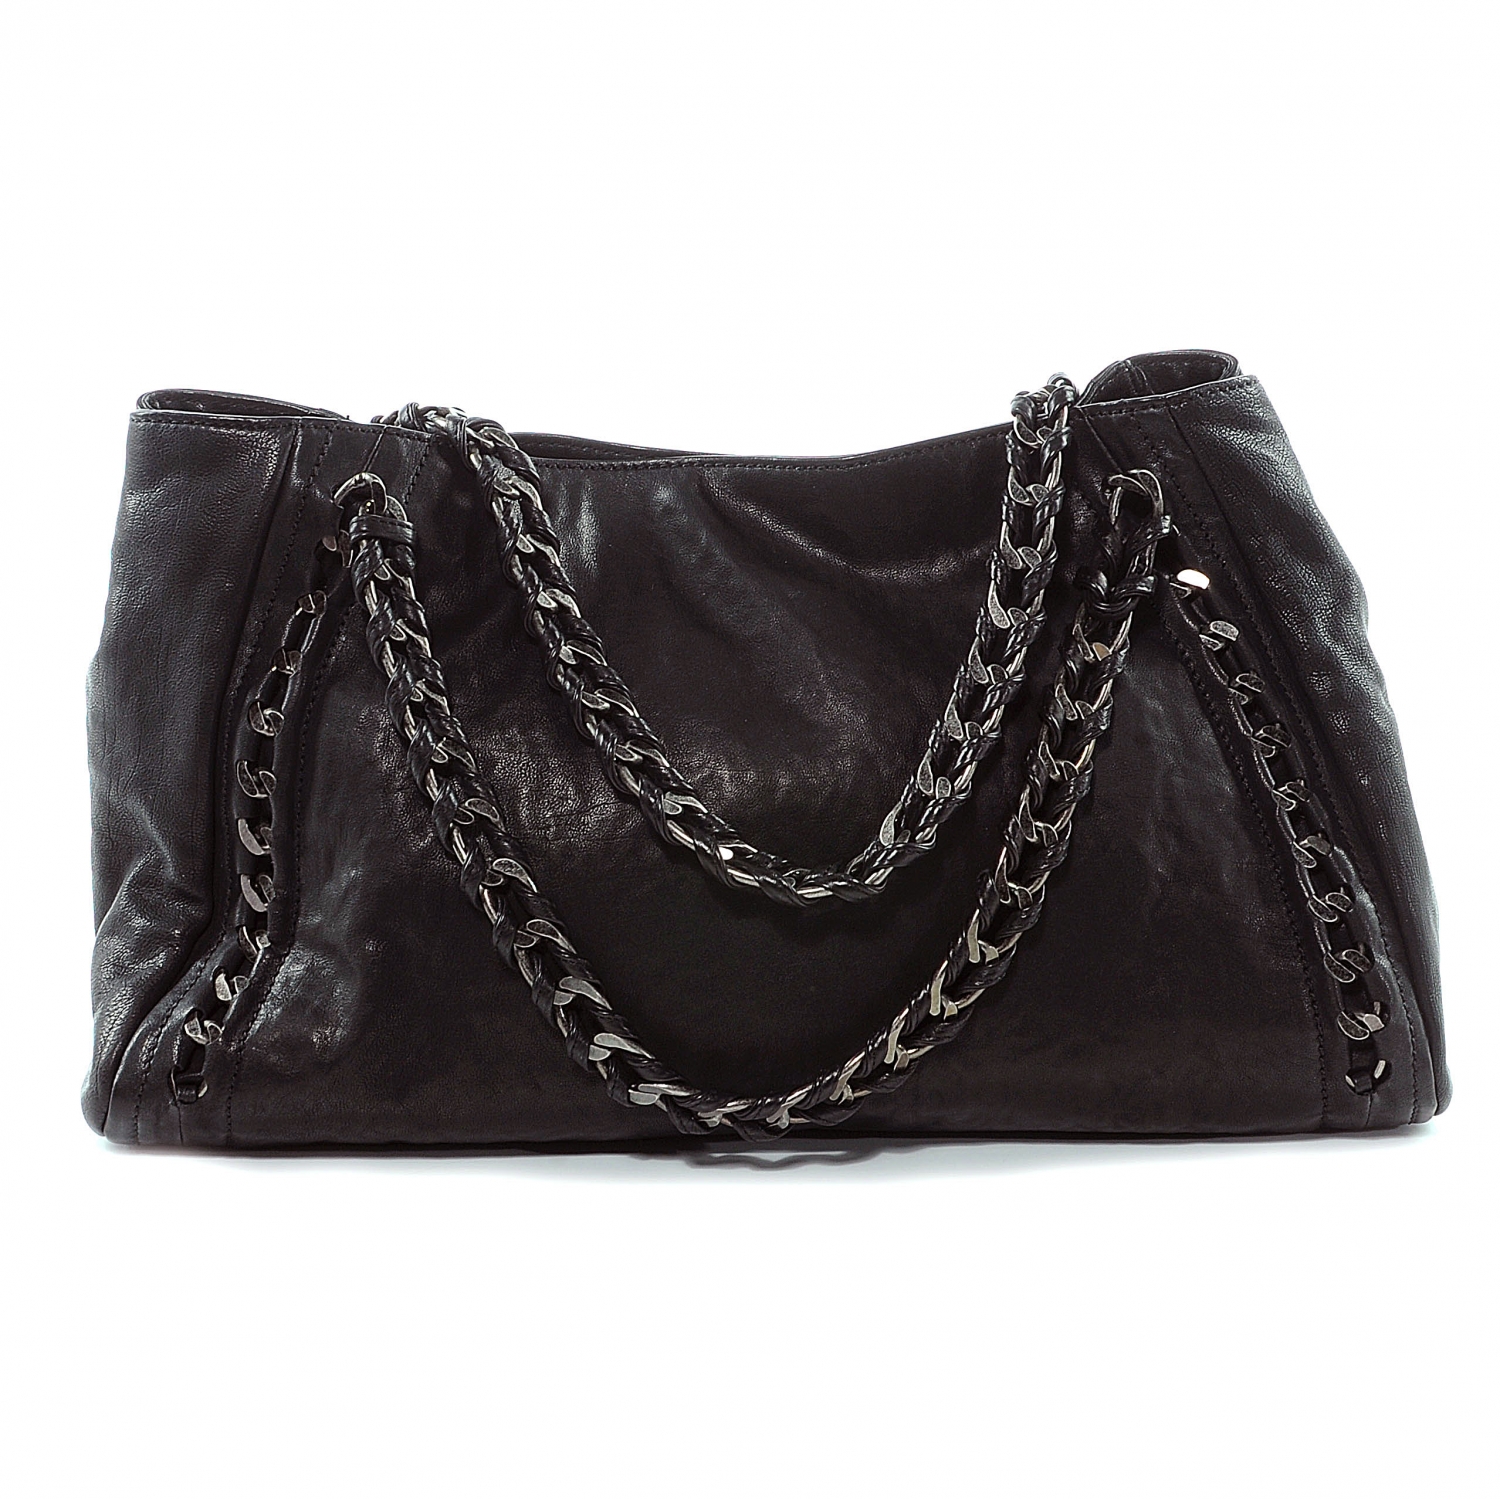 CHANEL Leather Modern Chain Large Tote Black 51827